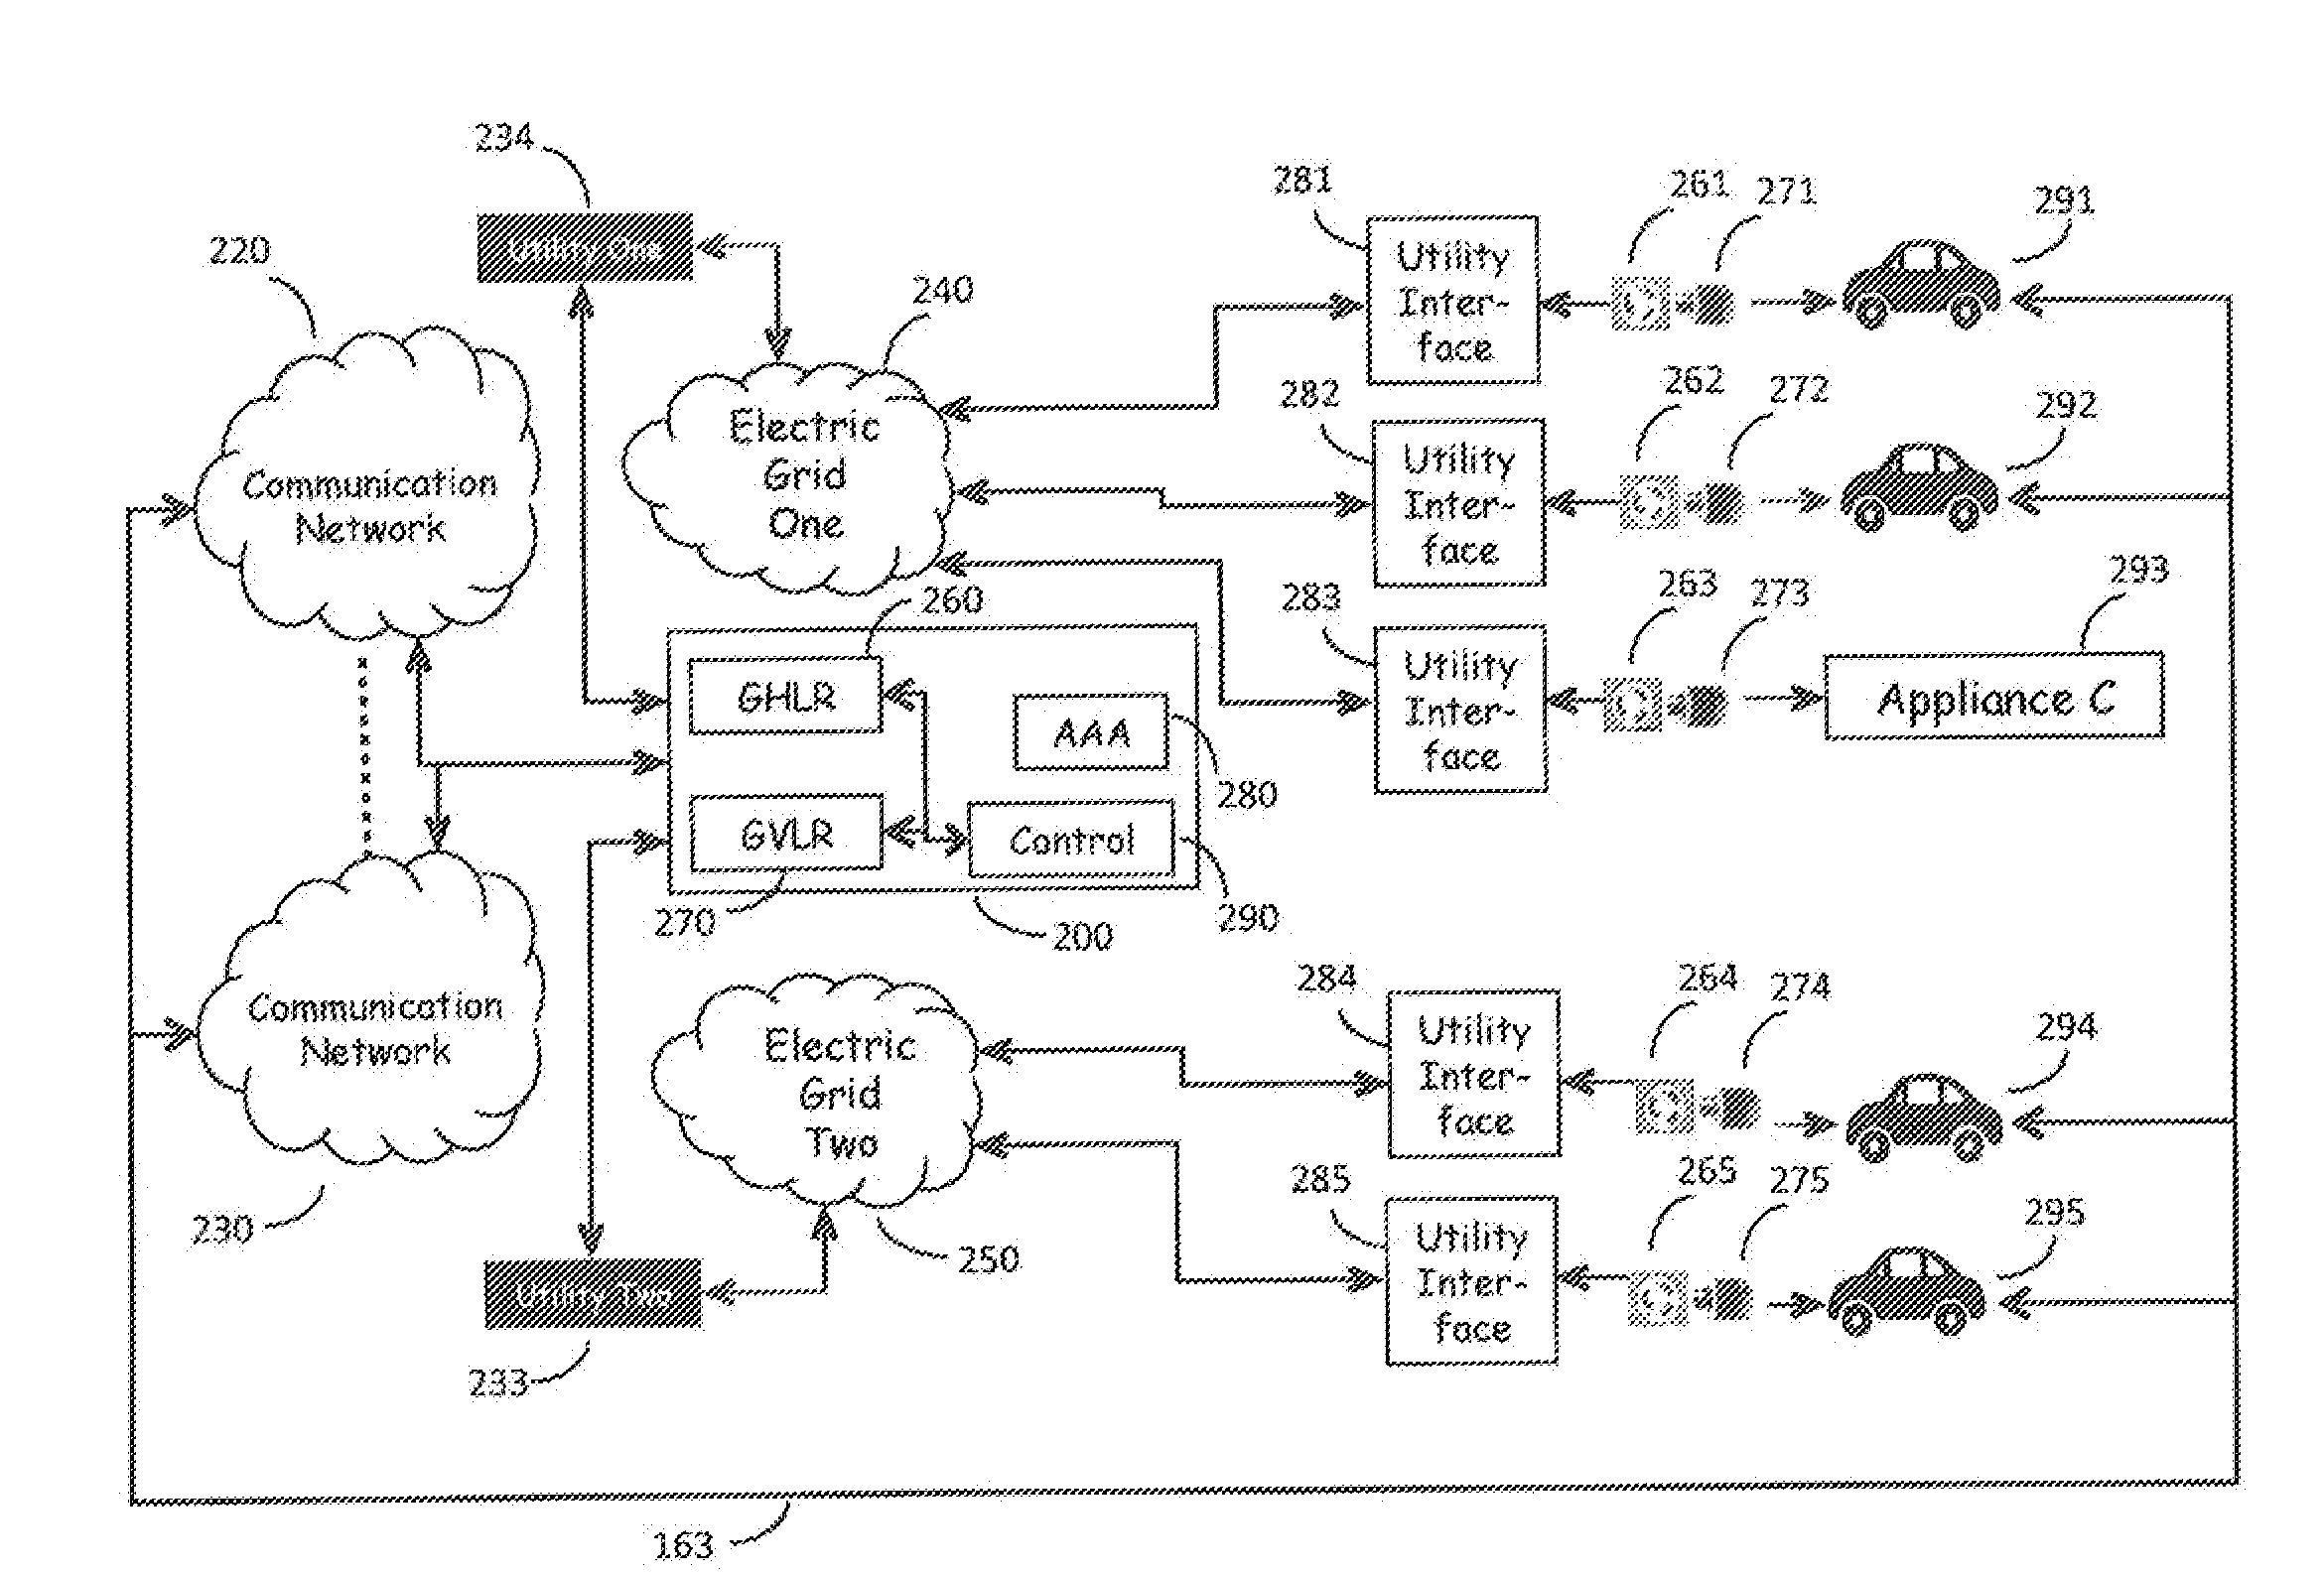 System for on-board metering of recharging energy consumption in vehicles equipped with electrically powered propulsion systems